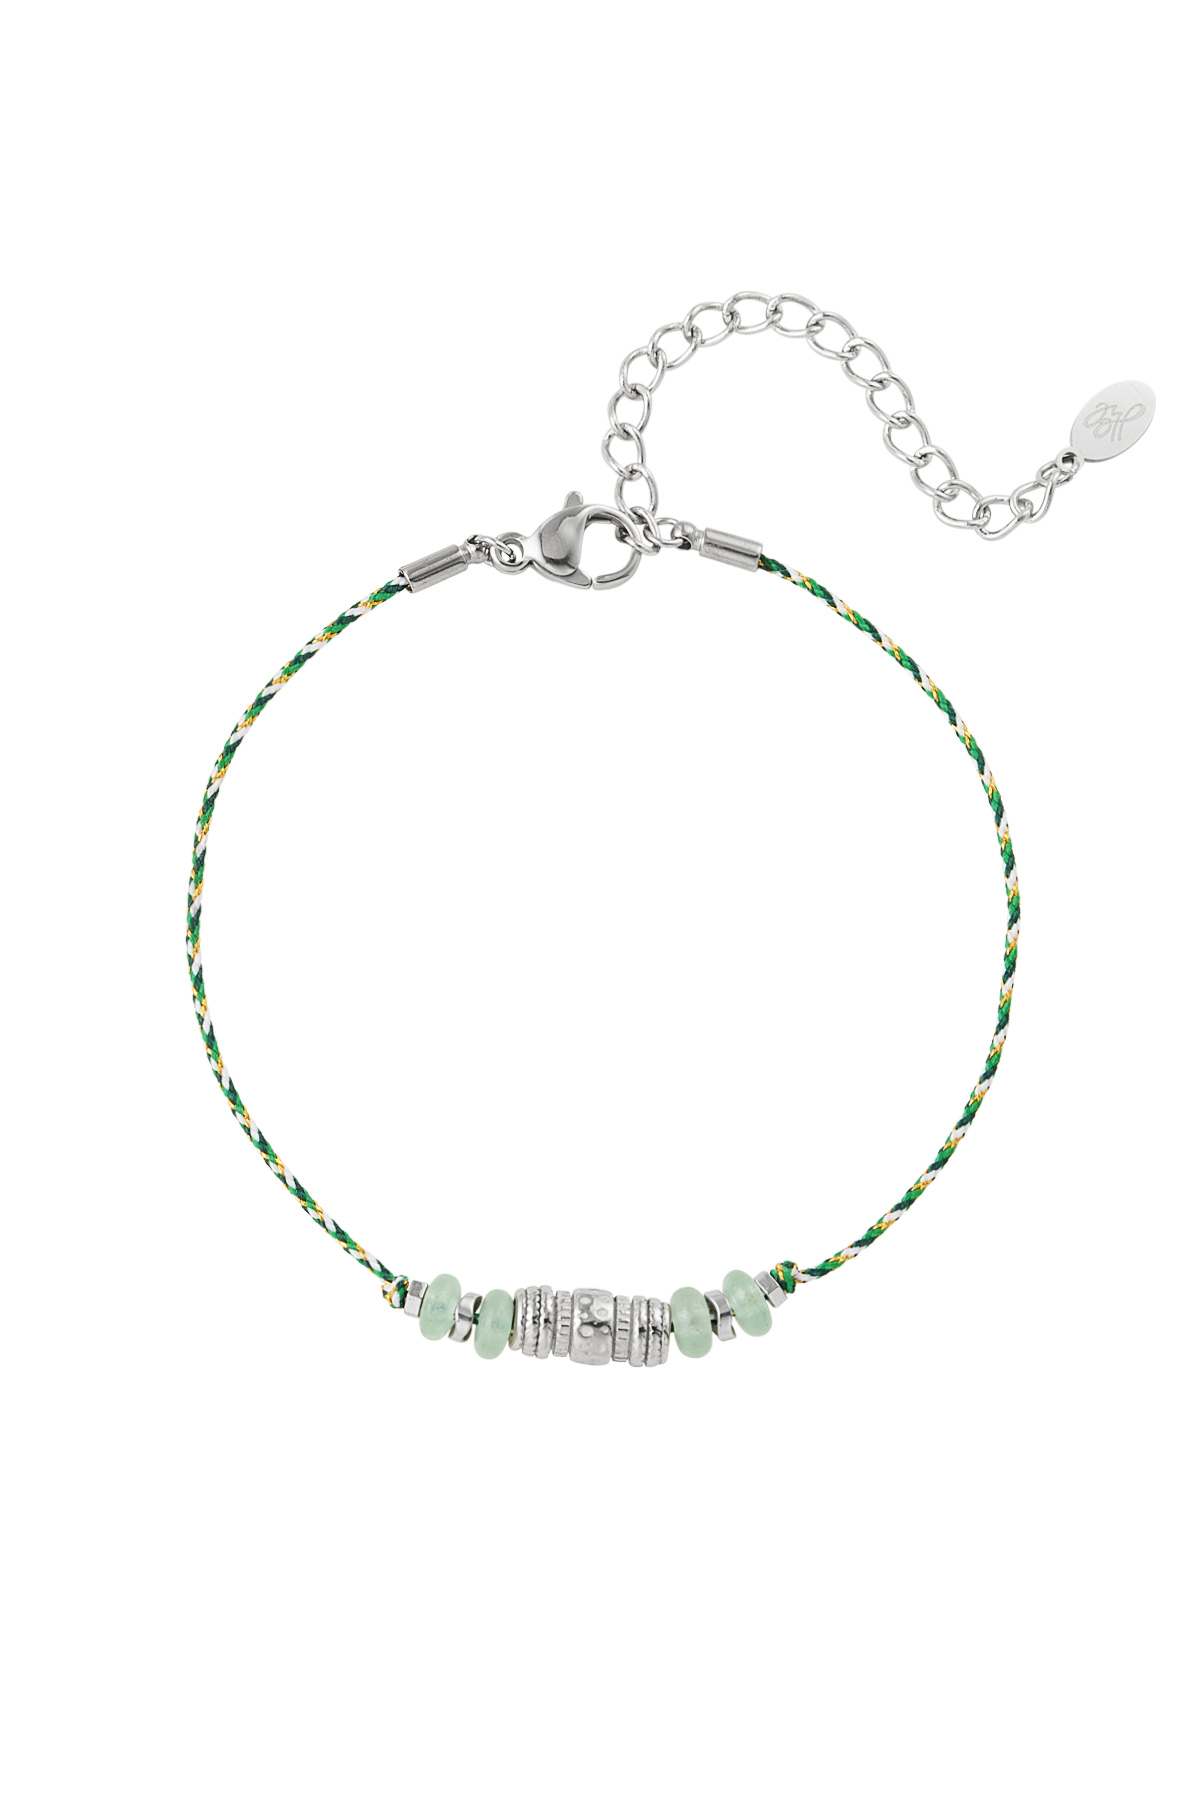 Satin bracelet with natural stones green and silver